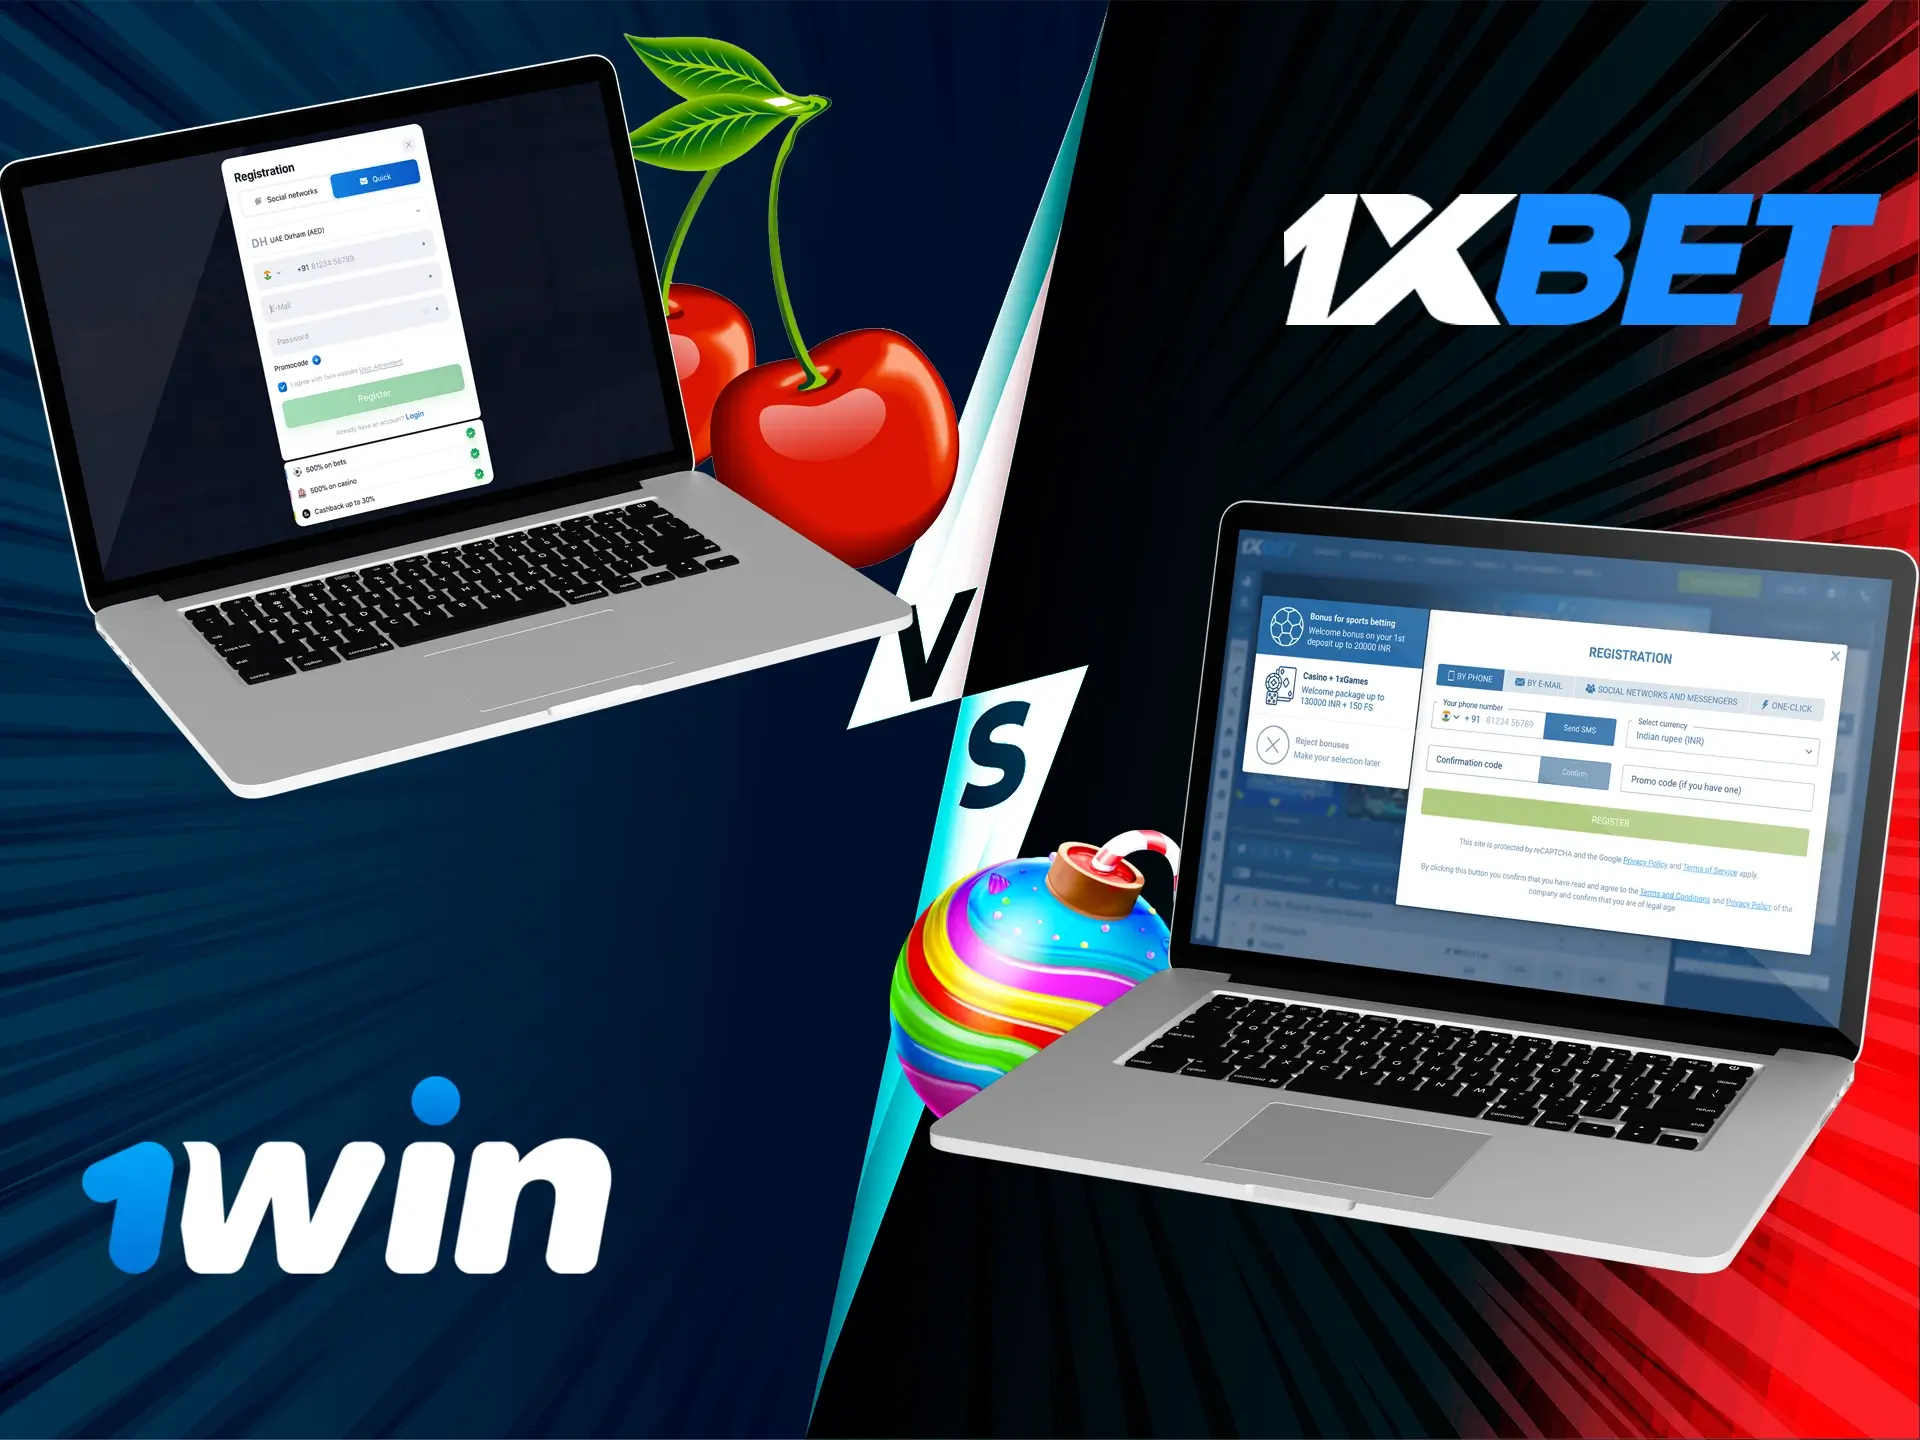 Signing up is easy with 1xbet and 1win.